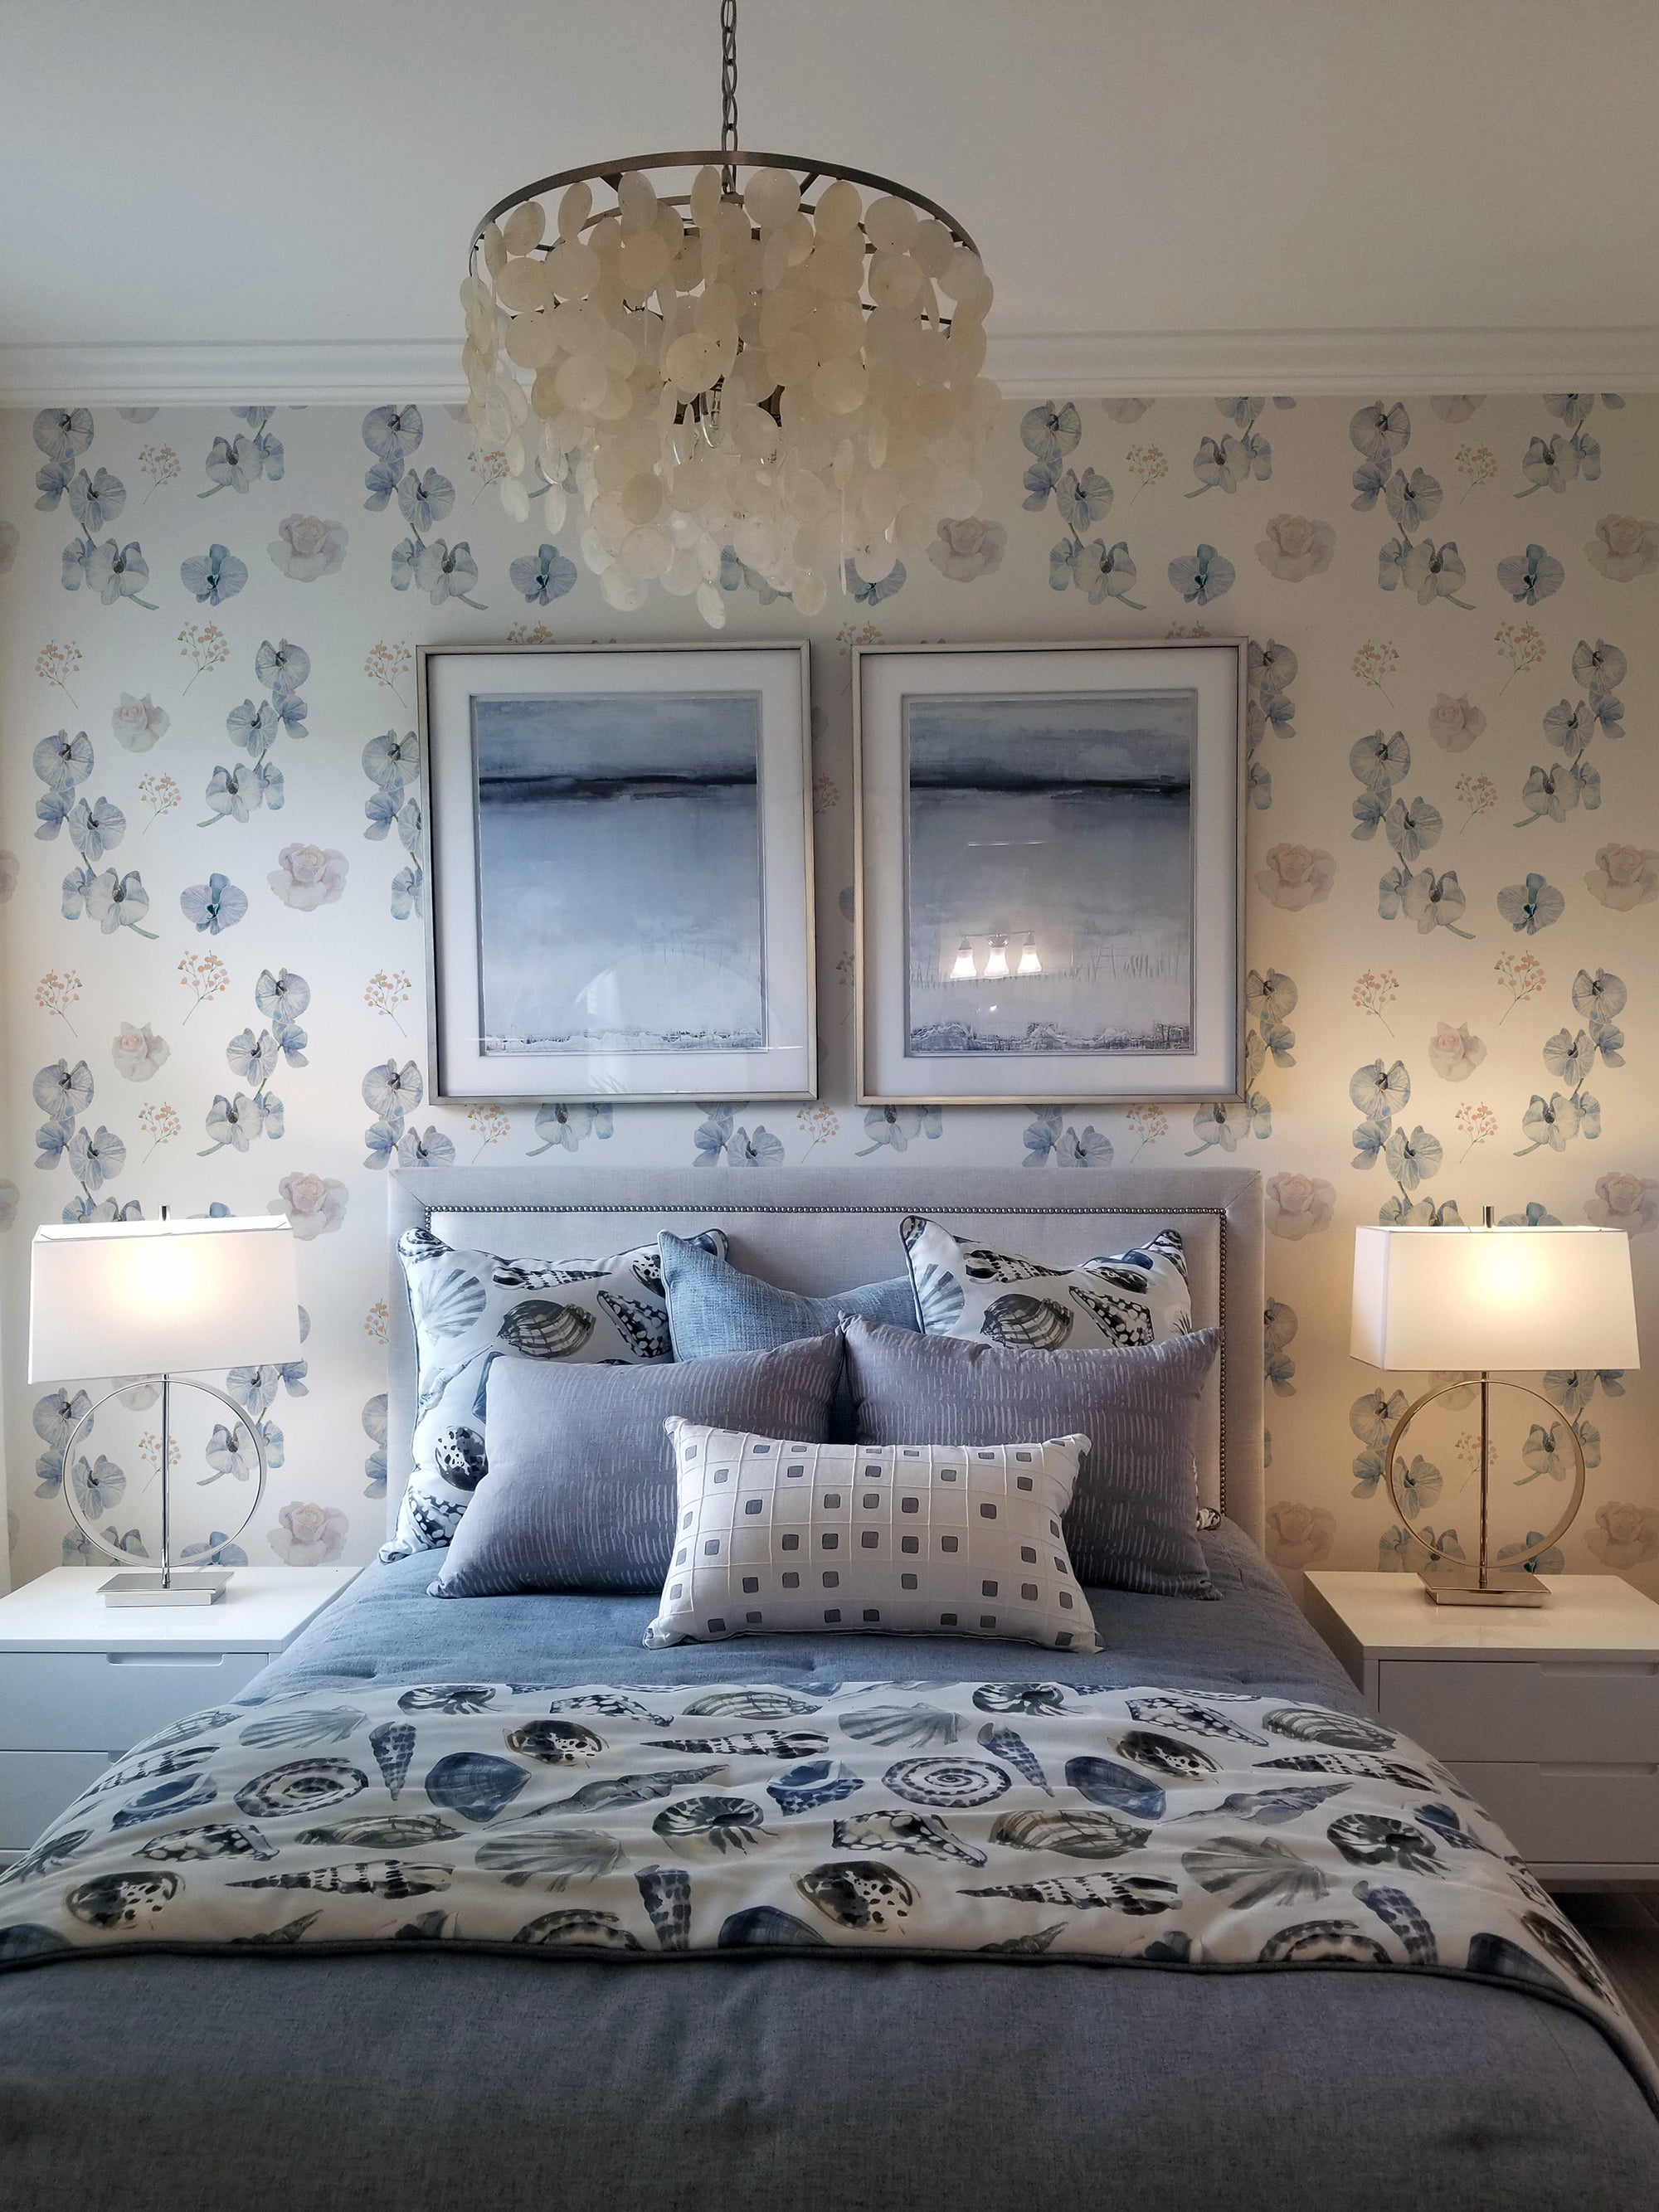 A cozy bedroom with a bed and nightstands against a wall covered in dreamy orchid wallpaper. The wallpaper features a delicate design of blue orchids, soft pink roses, and small sprigs of baby's breath on a light background, adding a touch of elegance and serenity to the room. The bed is adorned with blue and white bedding and framed artwork hangs above the headboard.